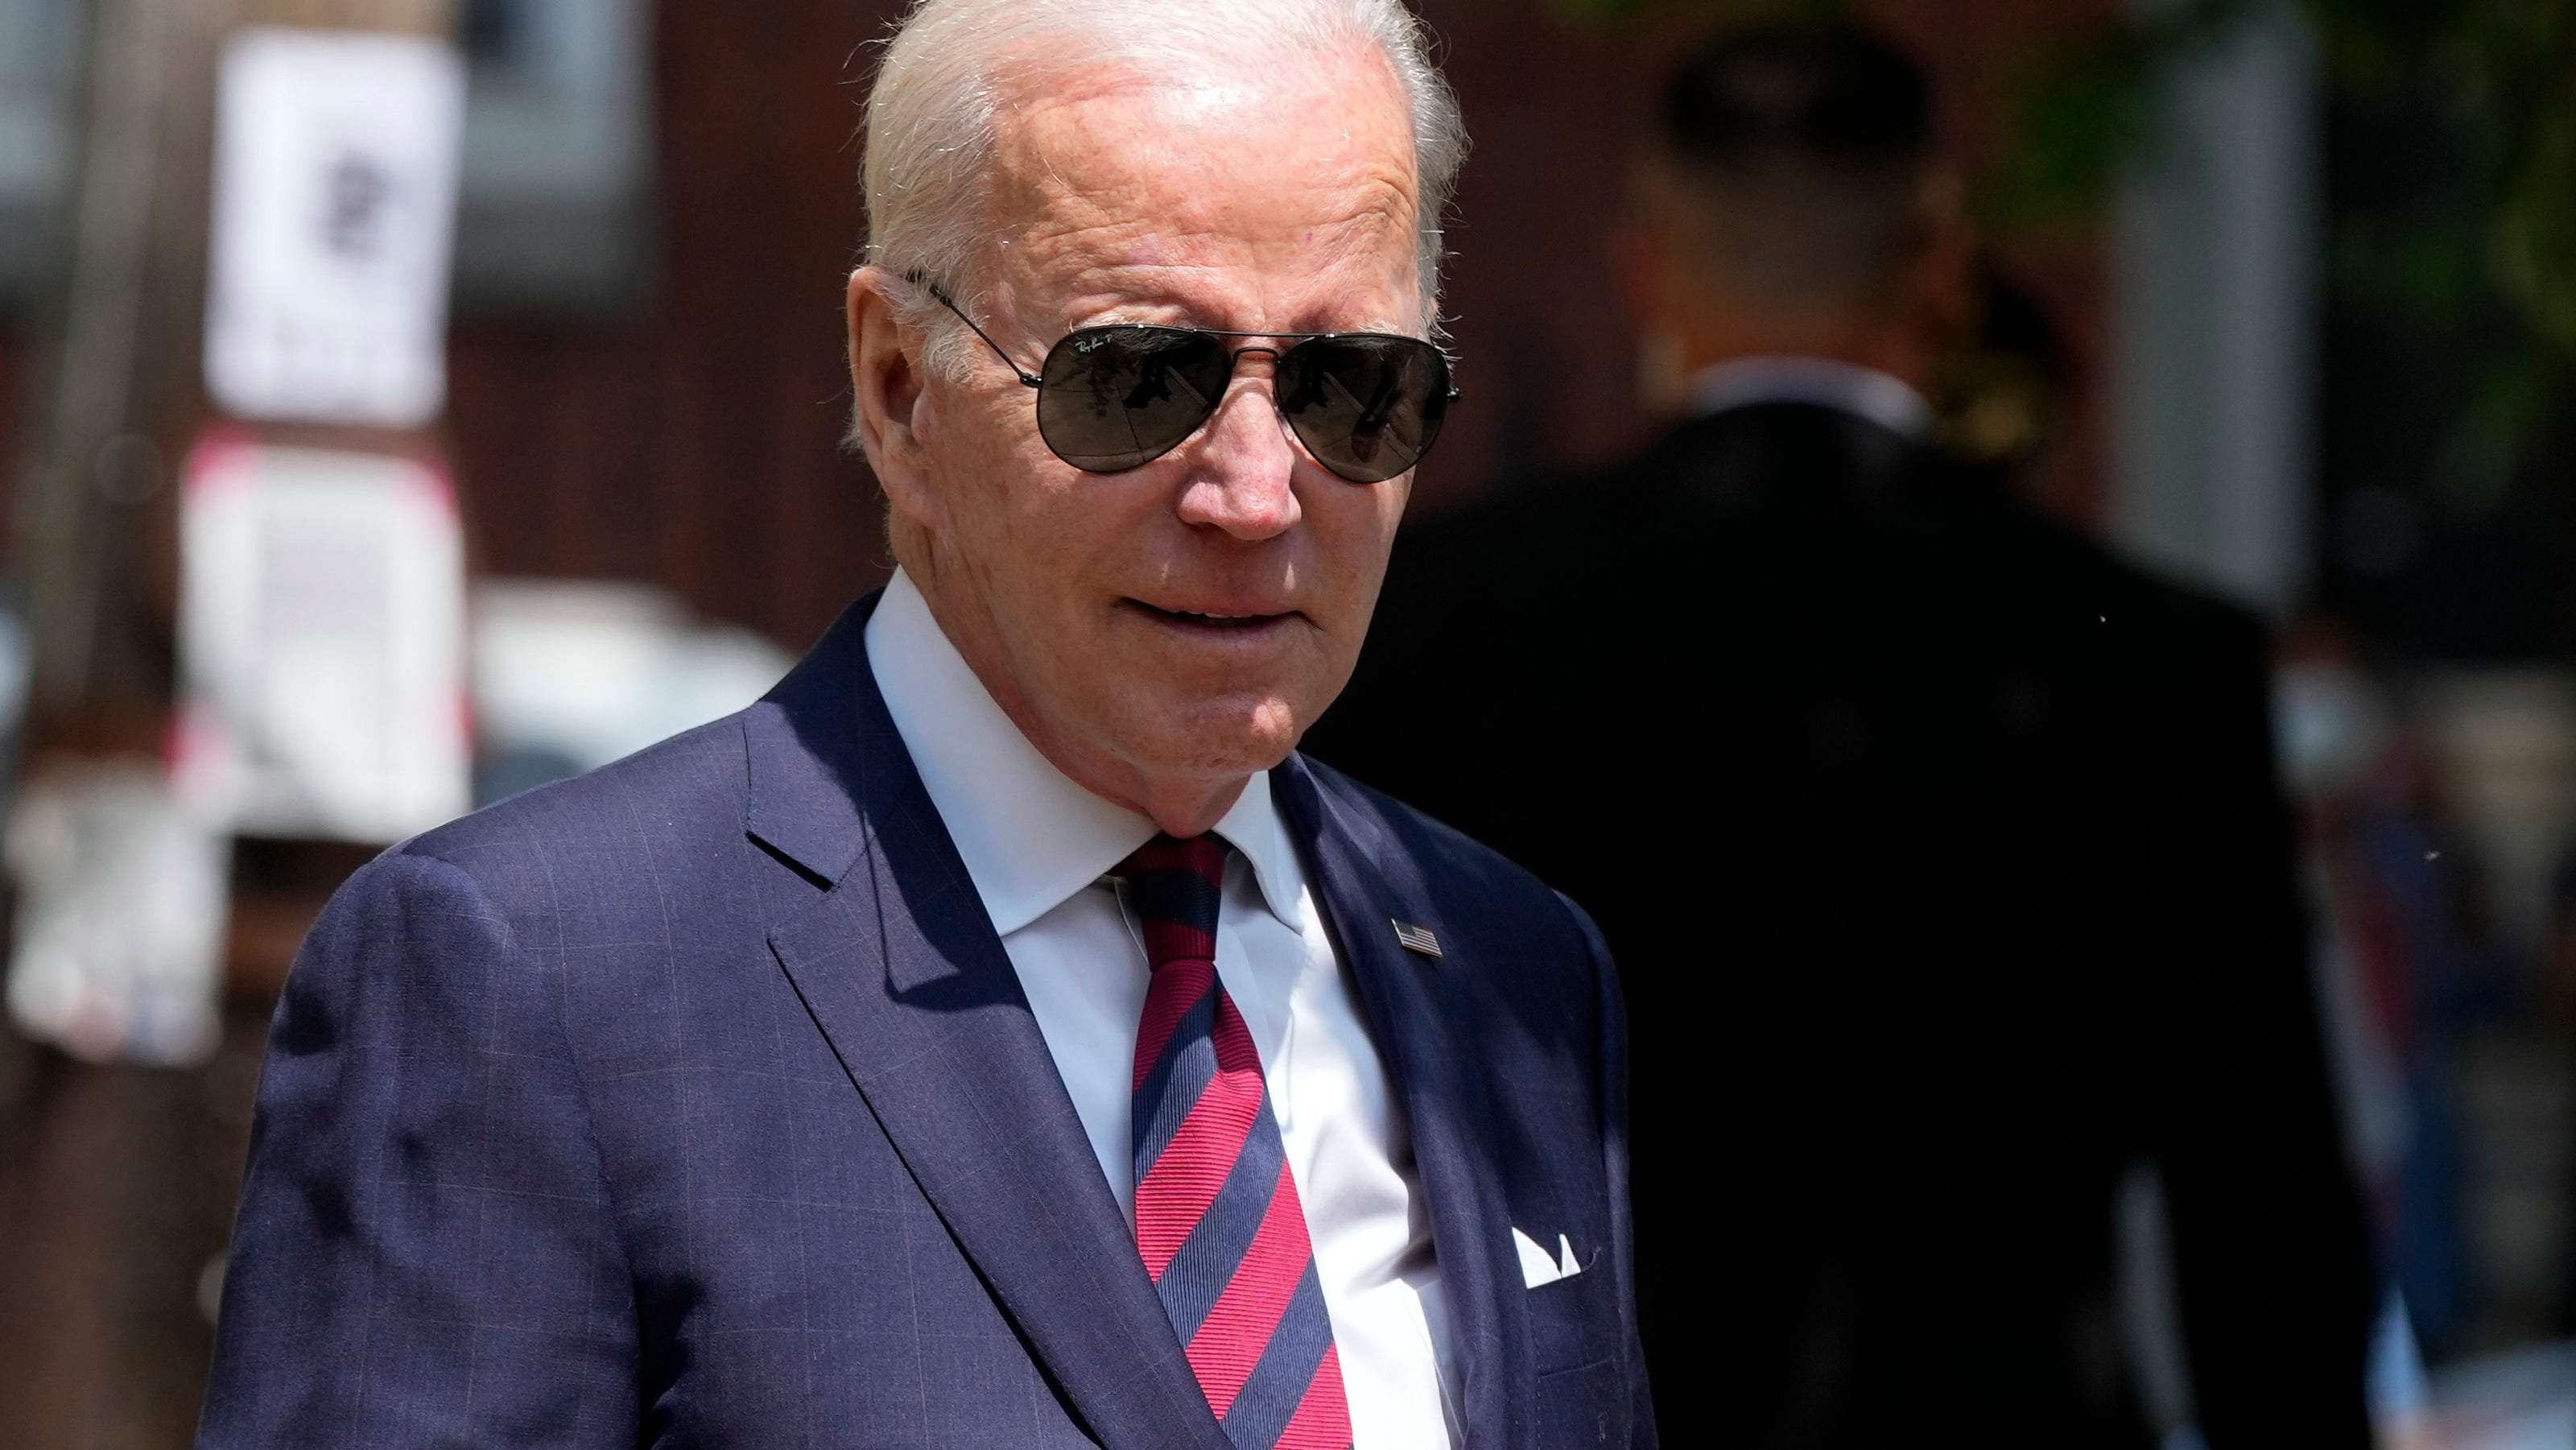 image for Joe Biden is definitely going to prison! As soon as the GOP finds its missing informant.